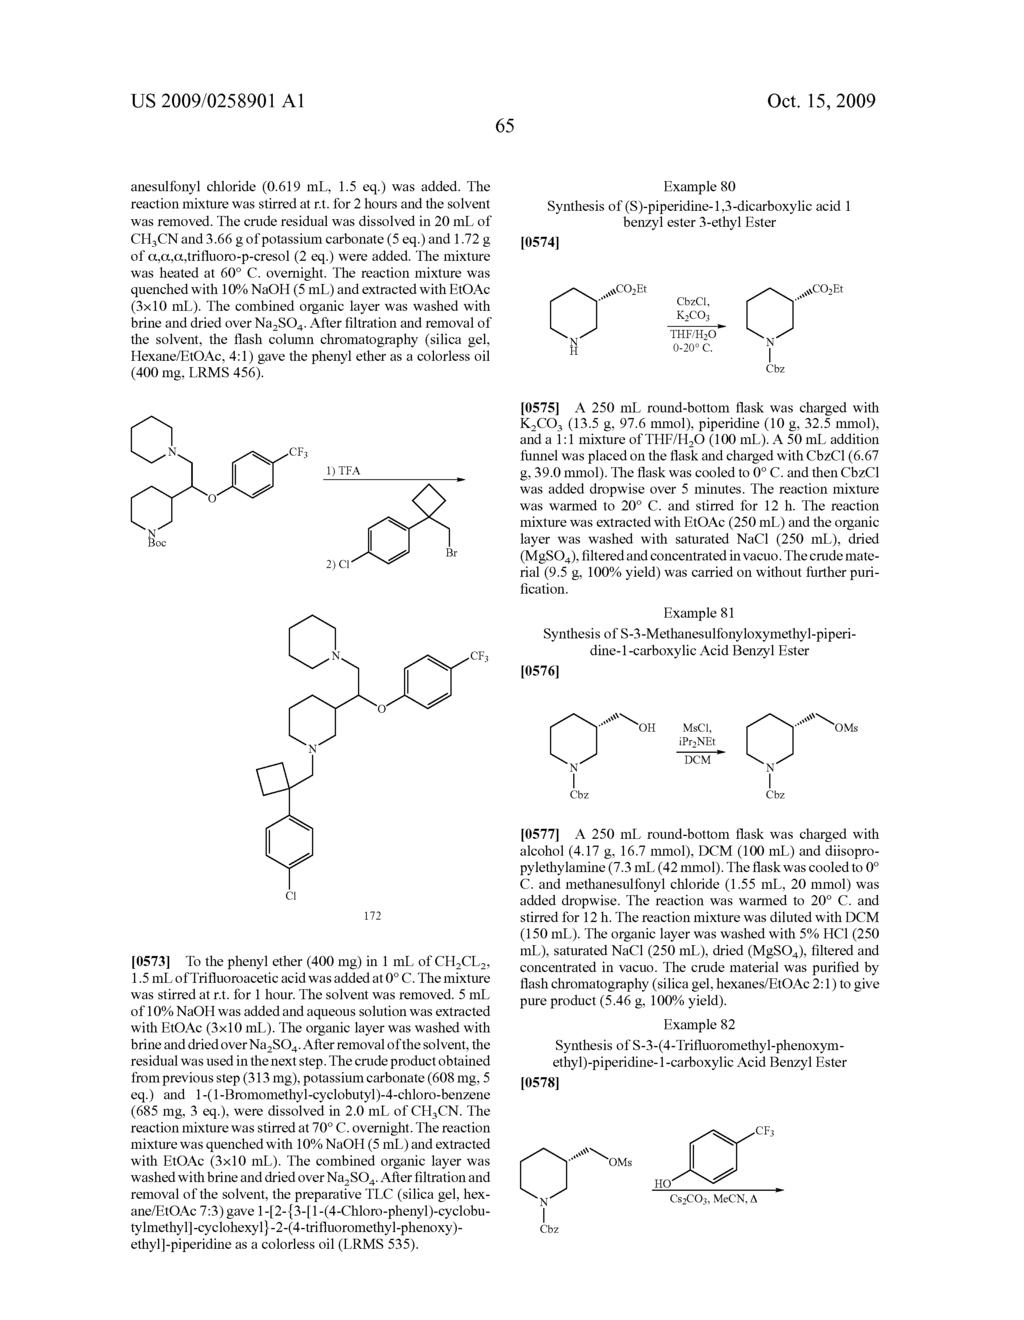 LIGANDS FOR MONOAMINE RECEPTORS AND TRANSPORTERS, AND METHODS OF USE THEREOF - diagram, schematic, and image 67